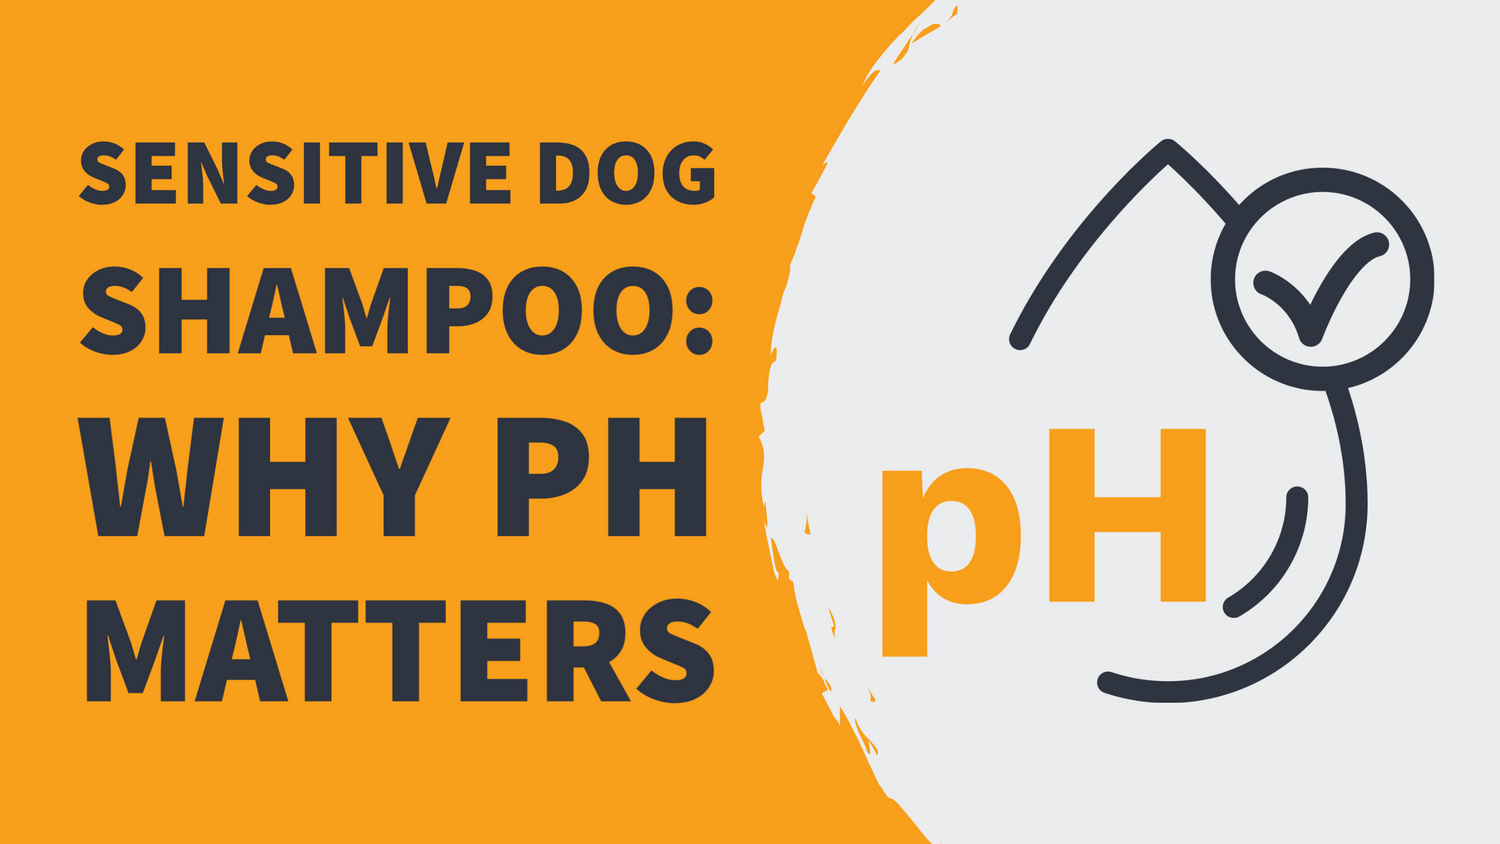 Graphic with text SENSITIVE DOG SHAMPOO: WHY PH MATTERS and an icon of a water droplet, the letters “pH” and a checkmark